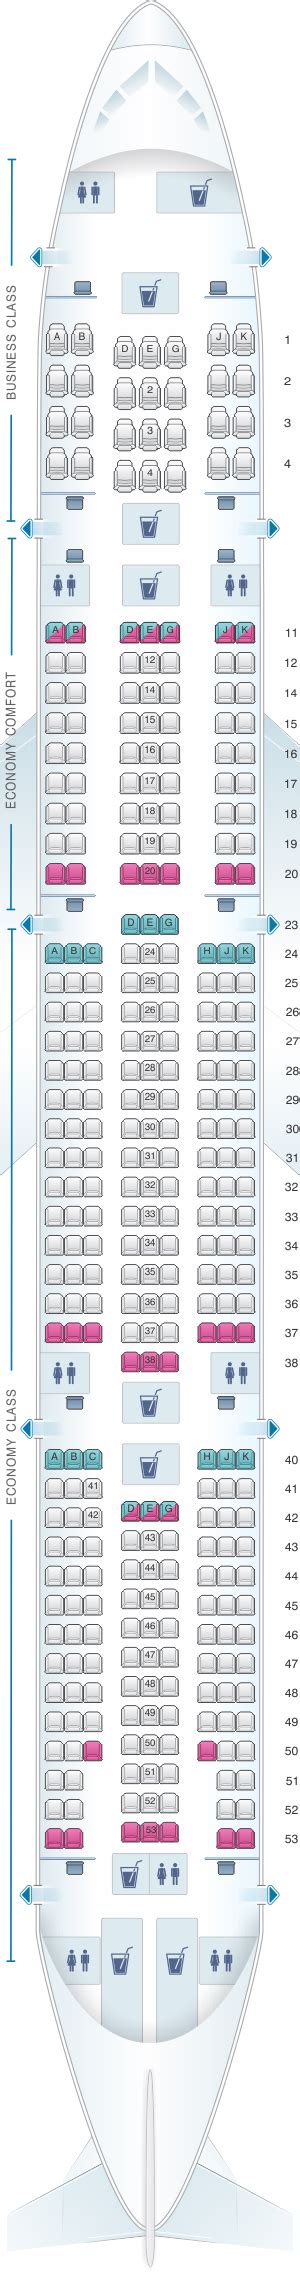 A Seat Map Turkish Airlines